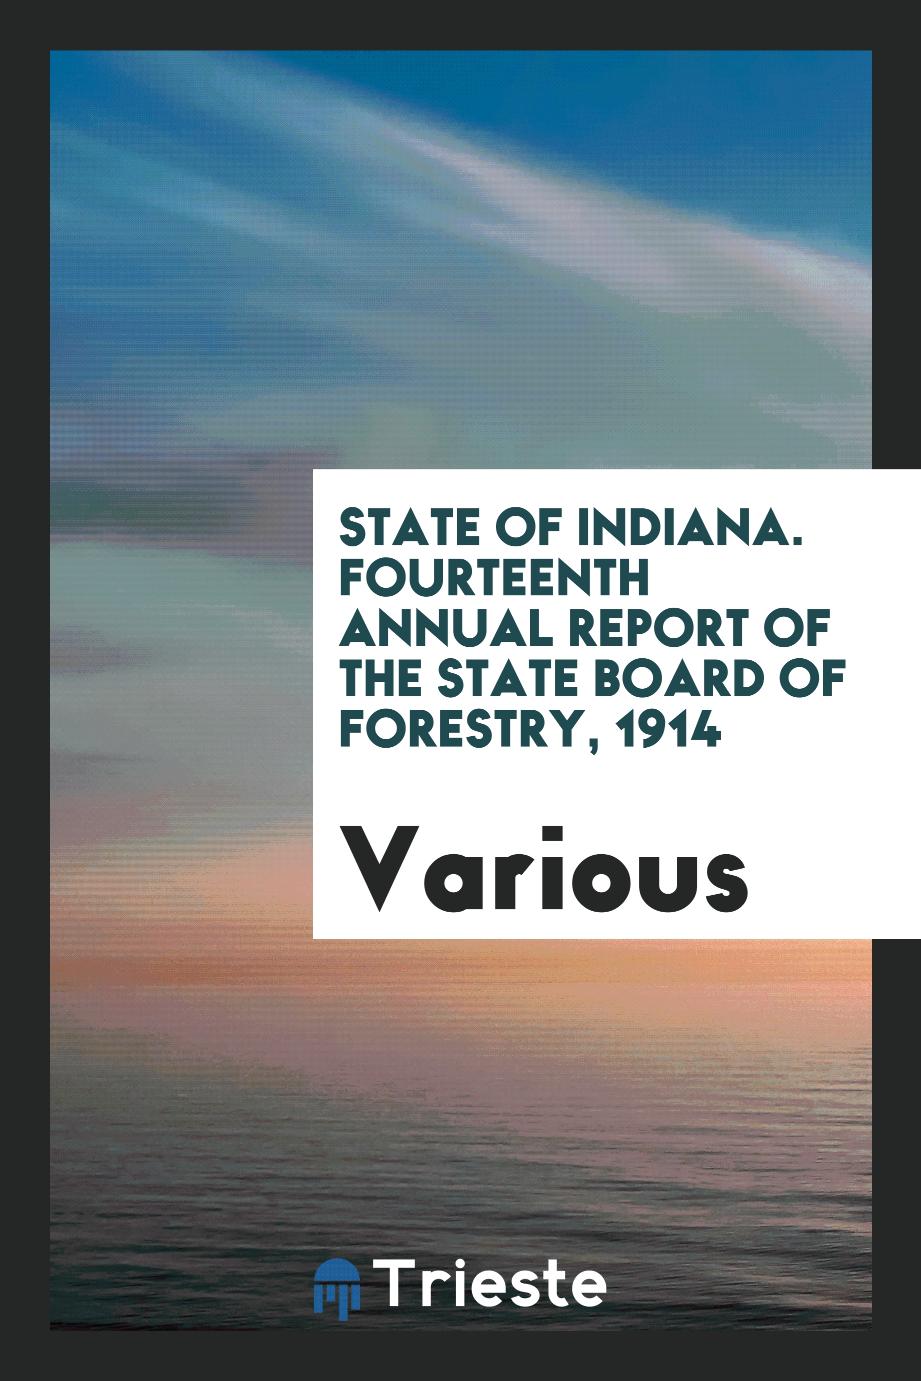 State of Indiana. Fourteenth Annual Report of the State Board of Forestry, 1914